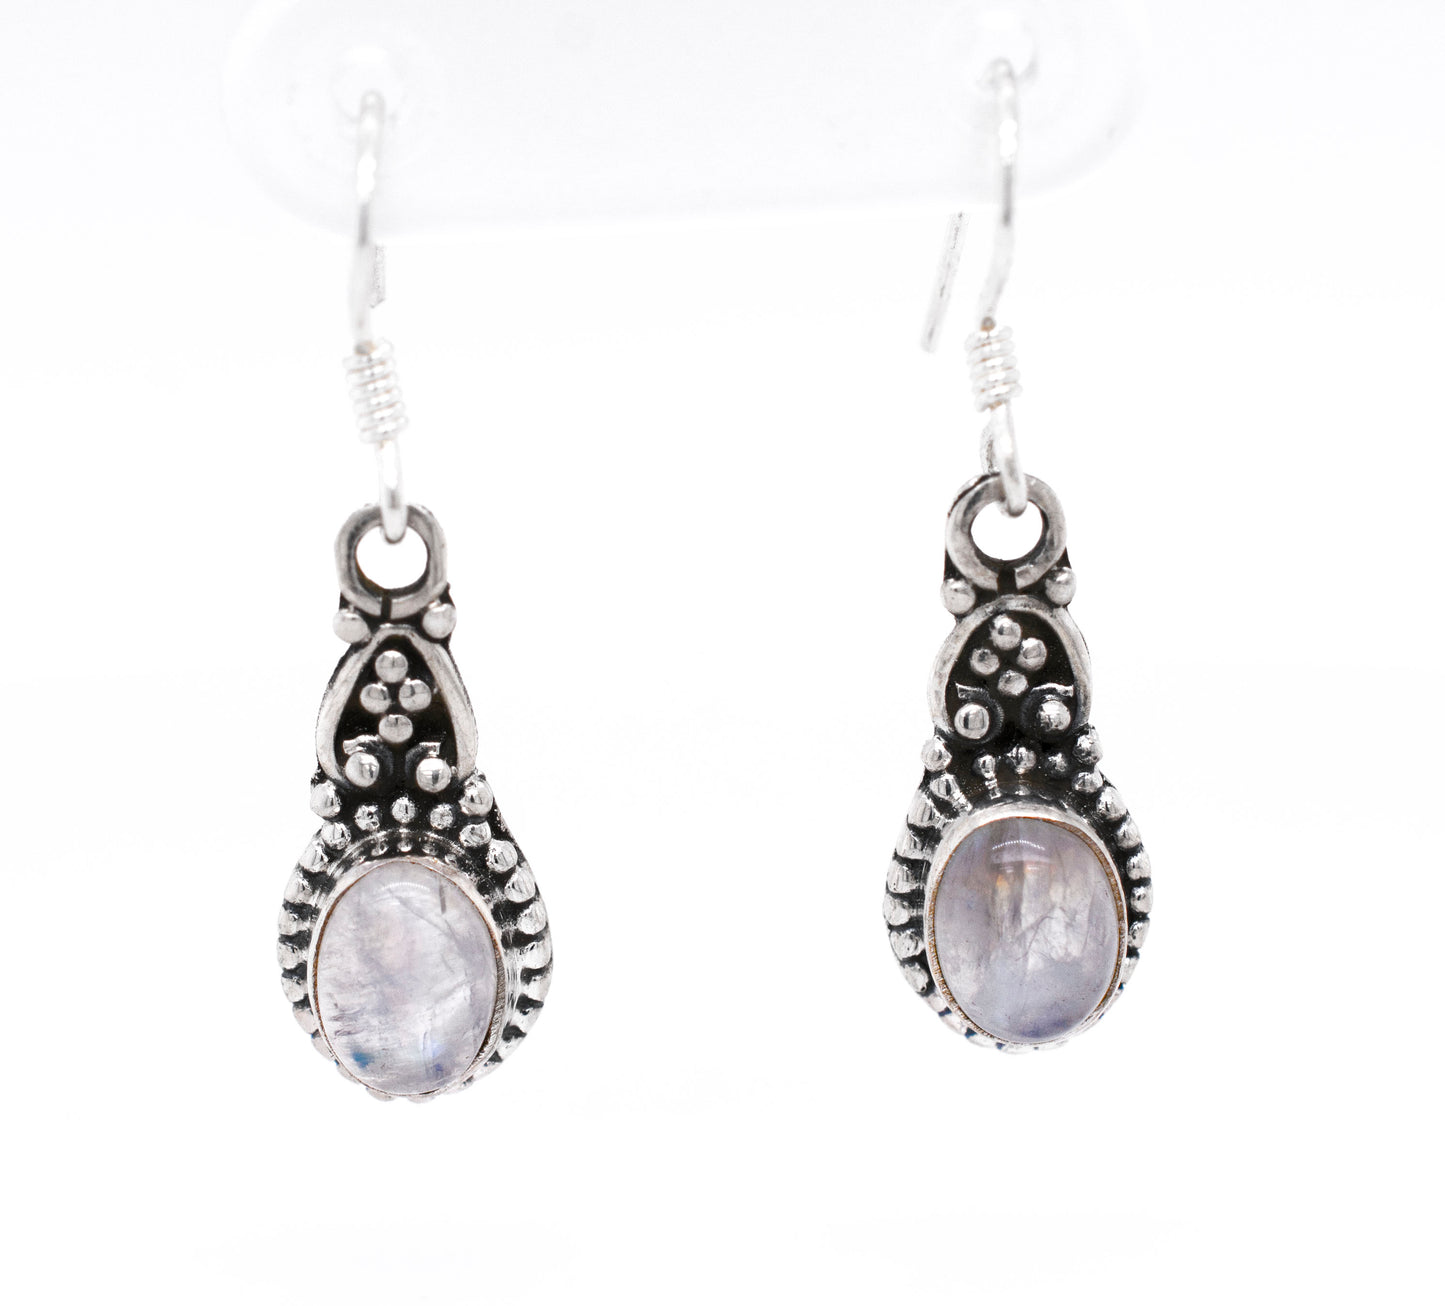 A pair of Dainty Bali Style Moonstone Earrings adorned with moonstones, by Super Silver.